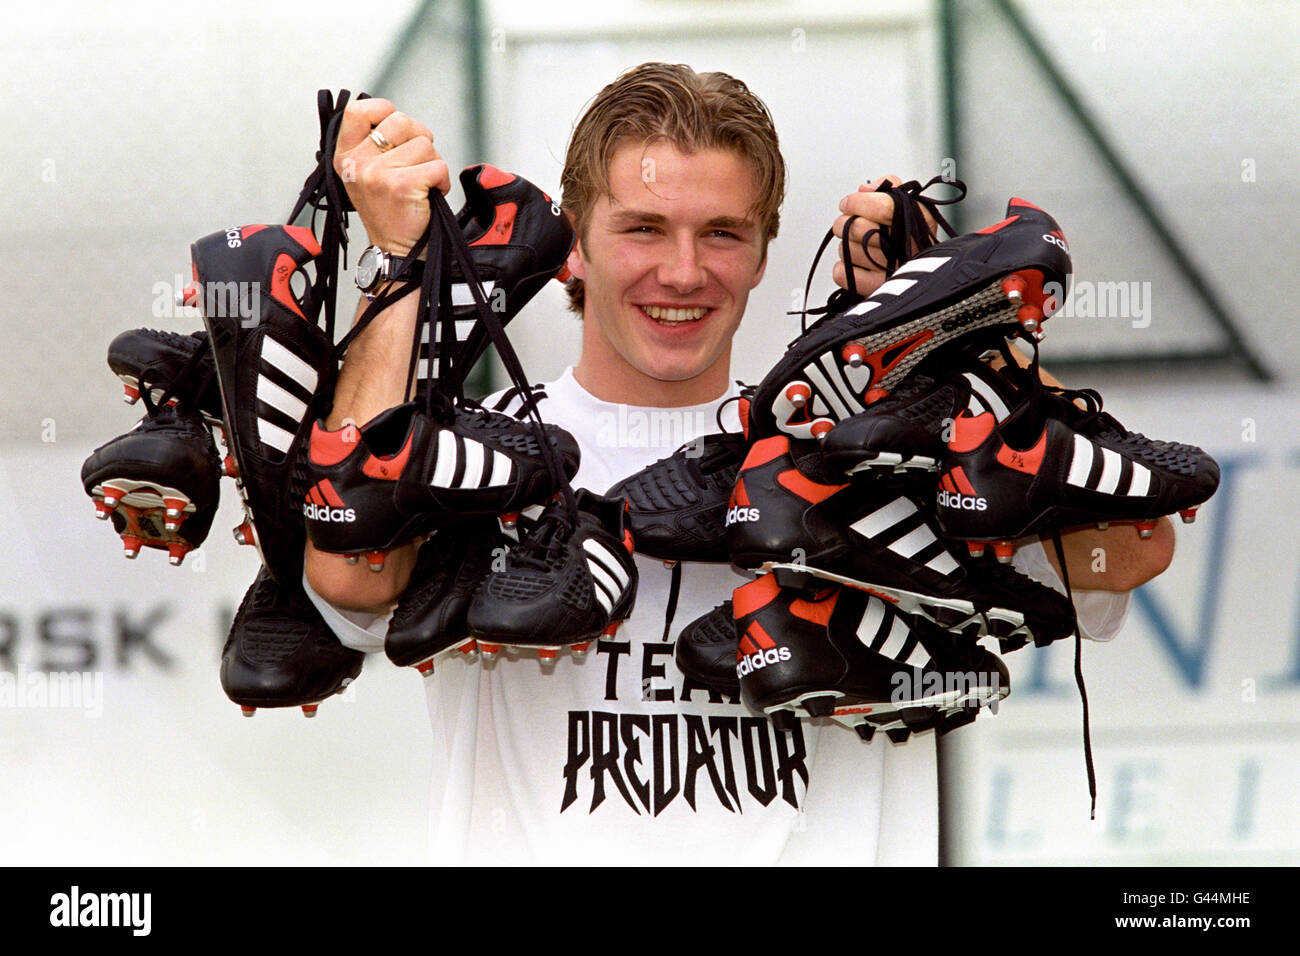 David Beckham - Adidas Deal - Stockport. Manchester United and England  Footballer David Beckham after signing a new deal with Adidas boots at  their Stockport headquarters Stock Photo - Alamy